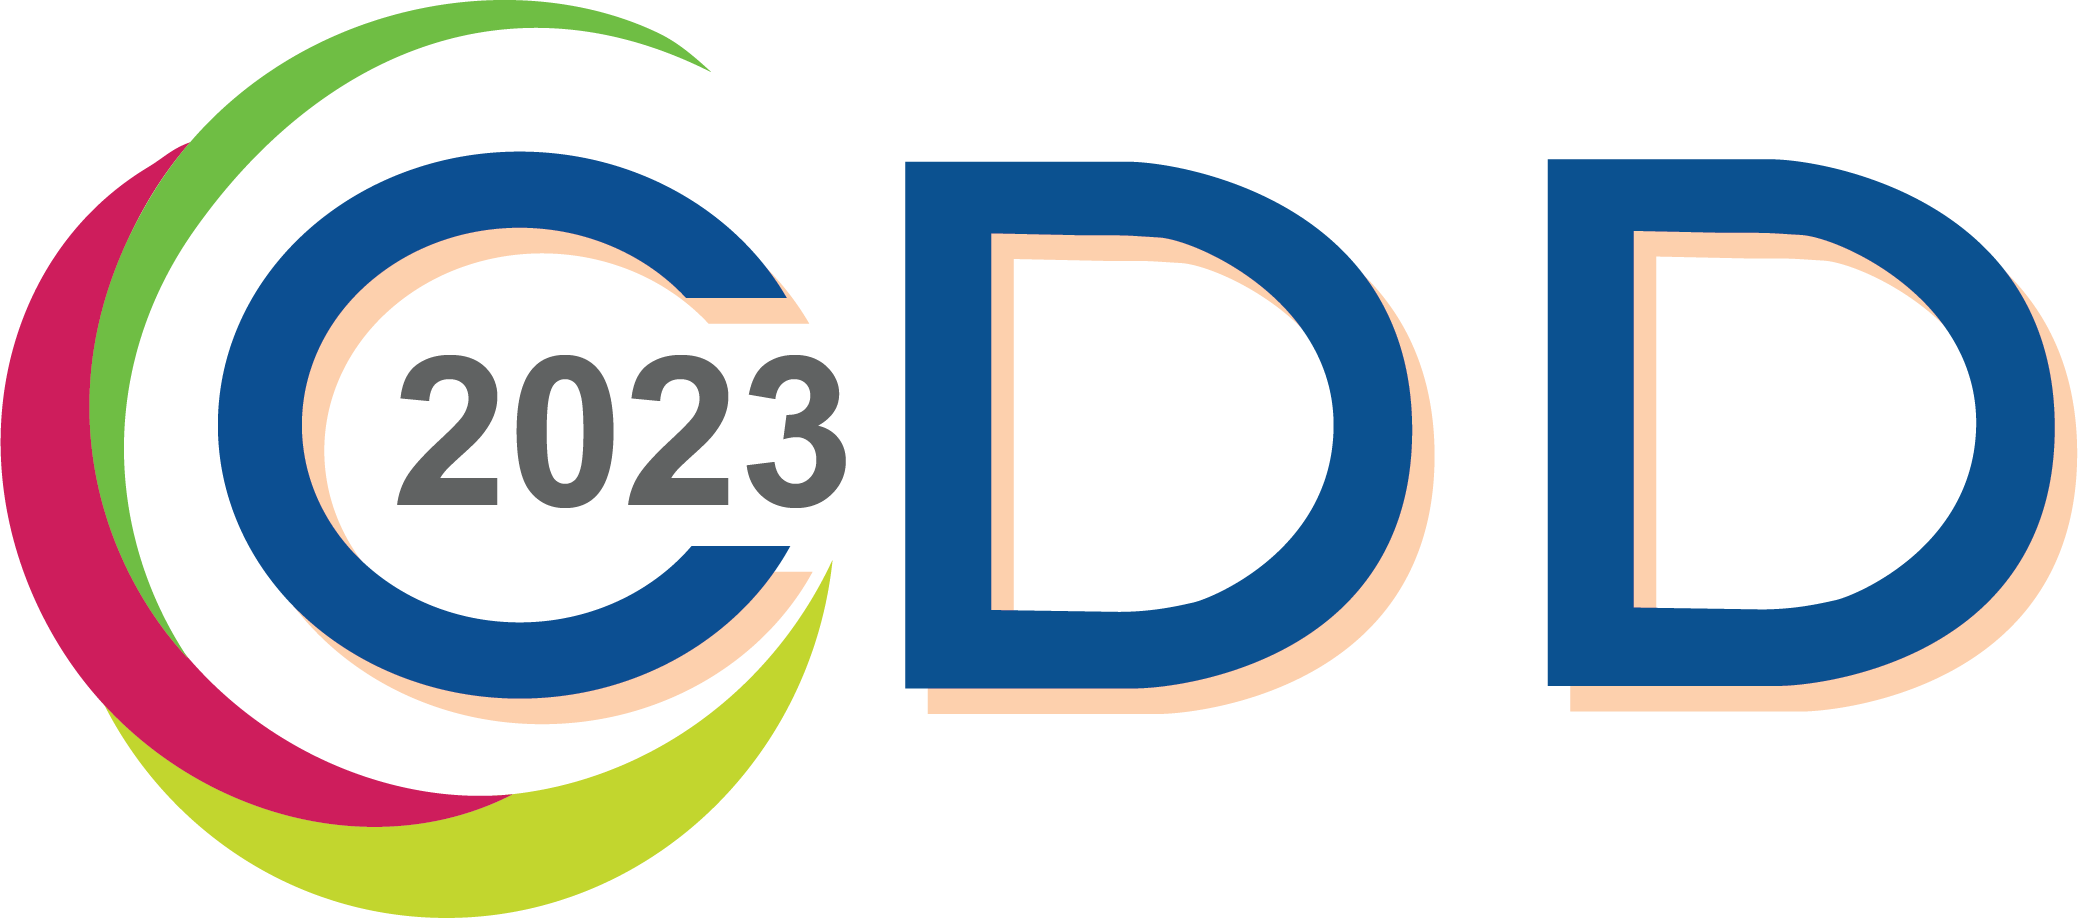 CDD2023 Conference